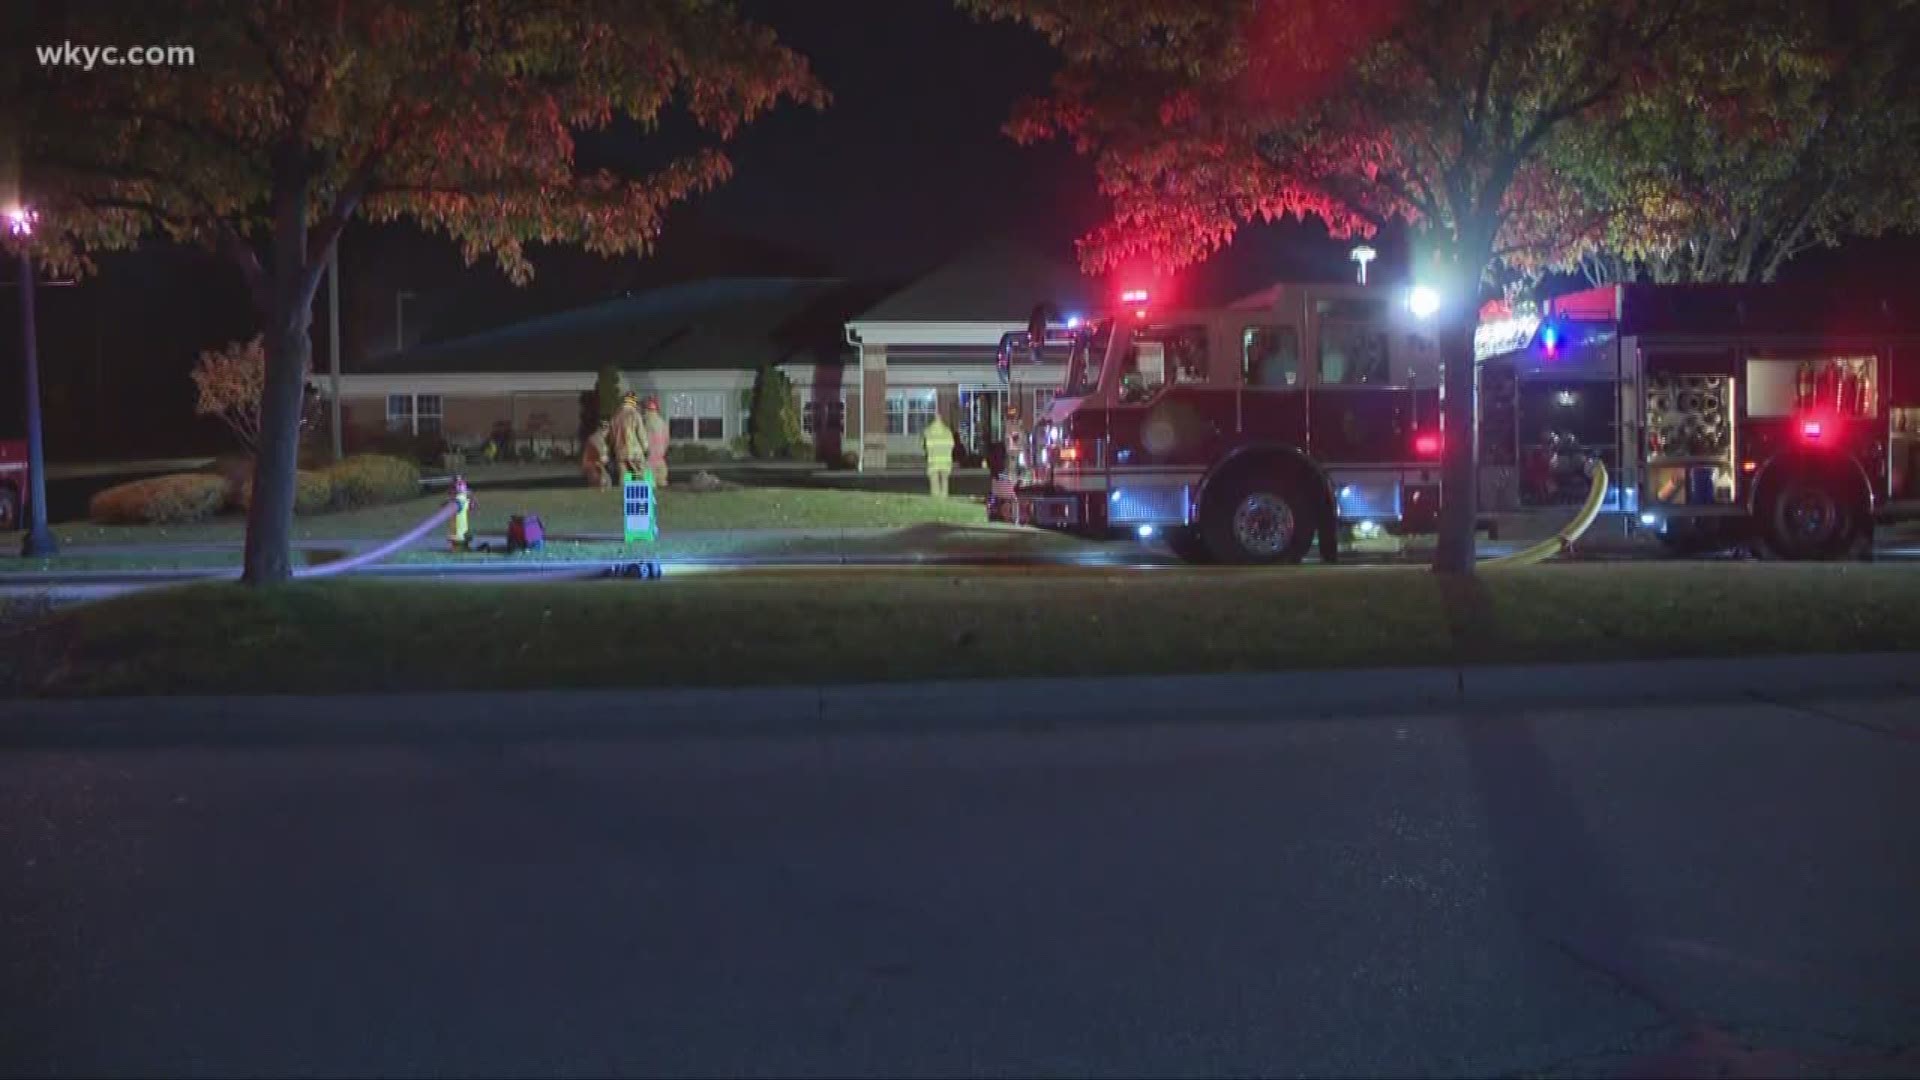 Fire breaks out at day care center in Green